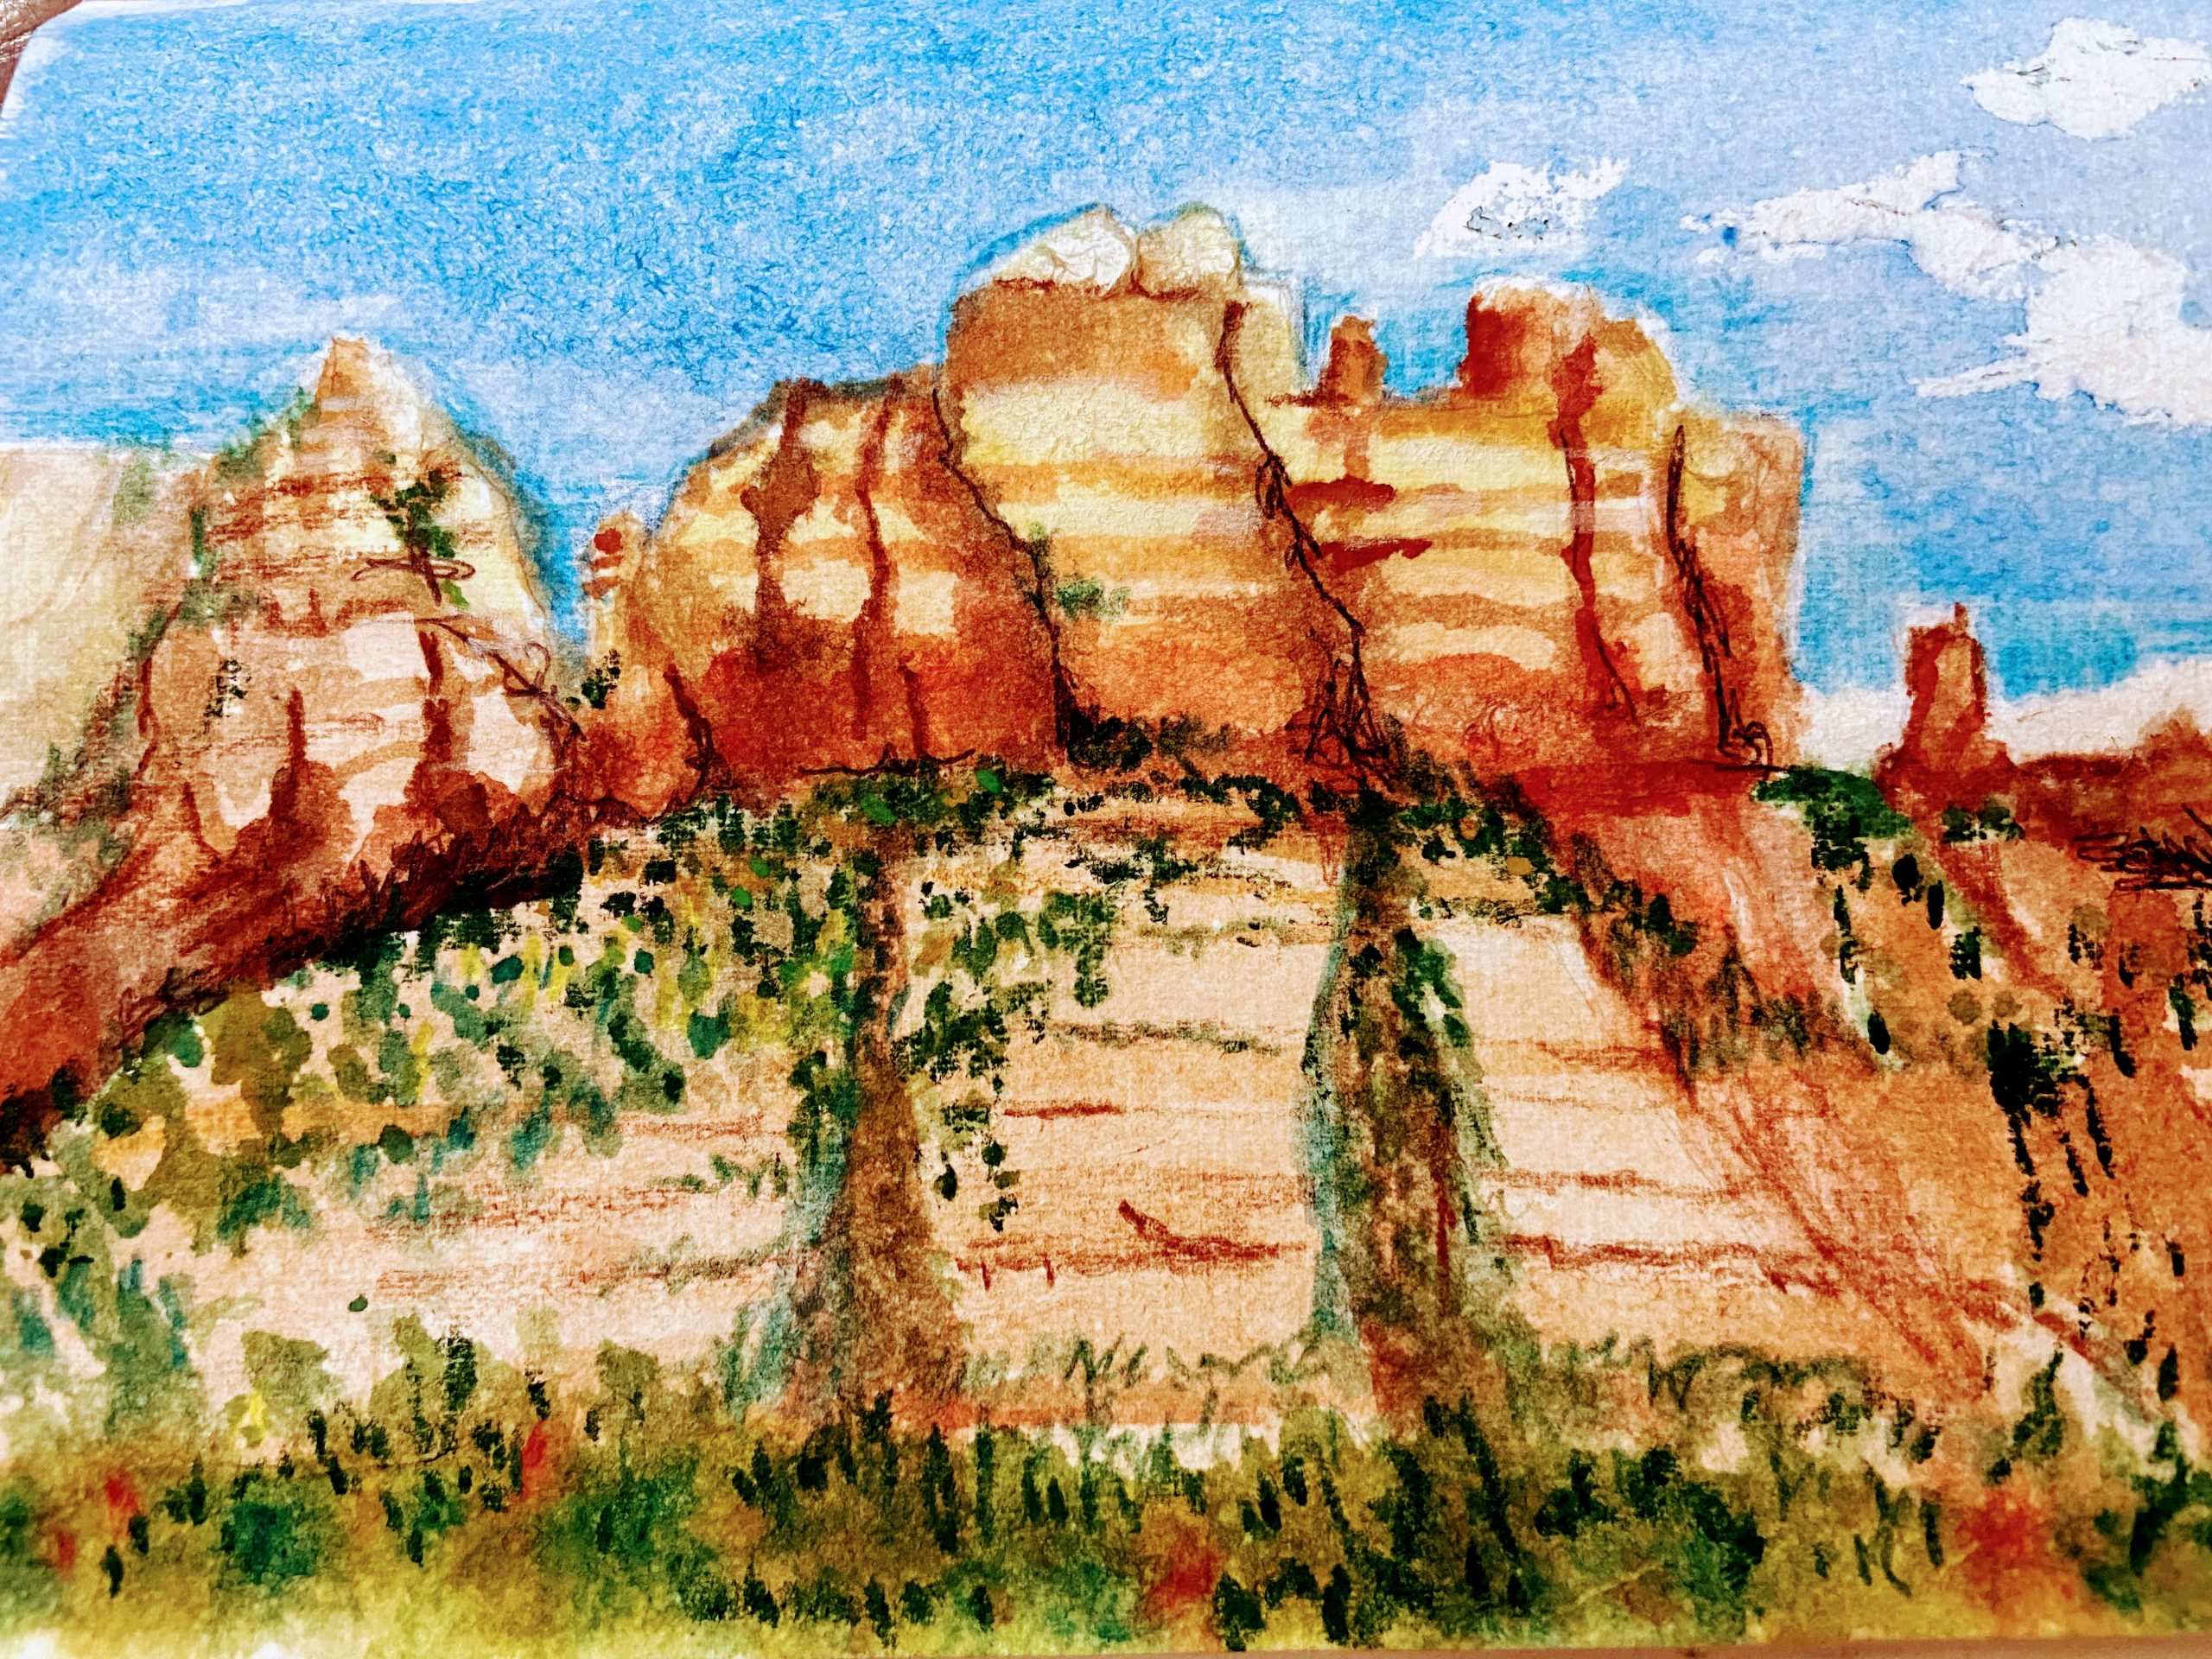 Watercolor Painting of Iconic Sedona Red Rock Formation